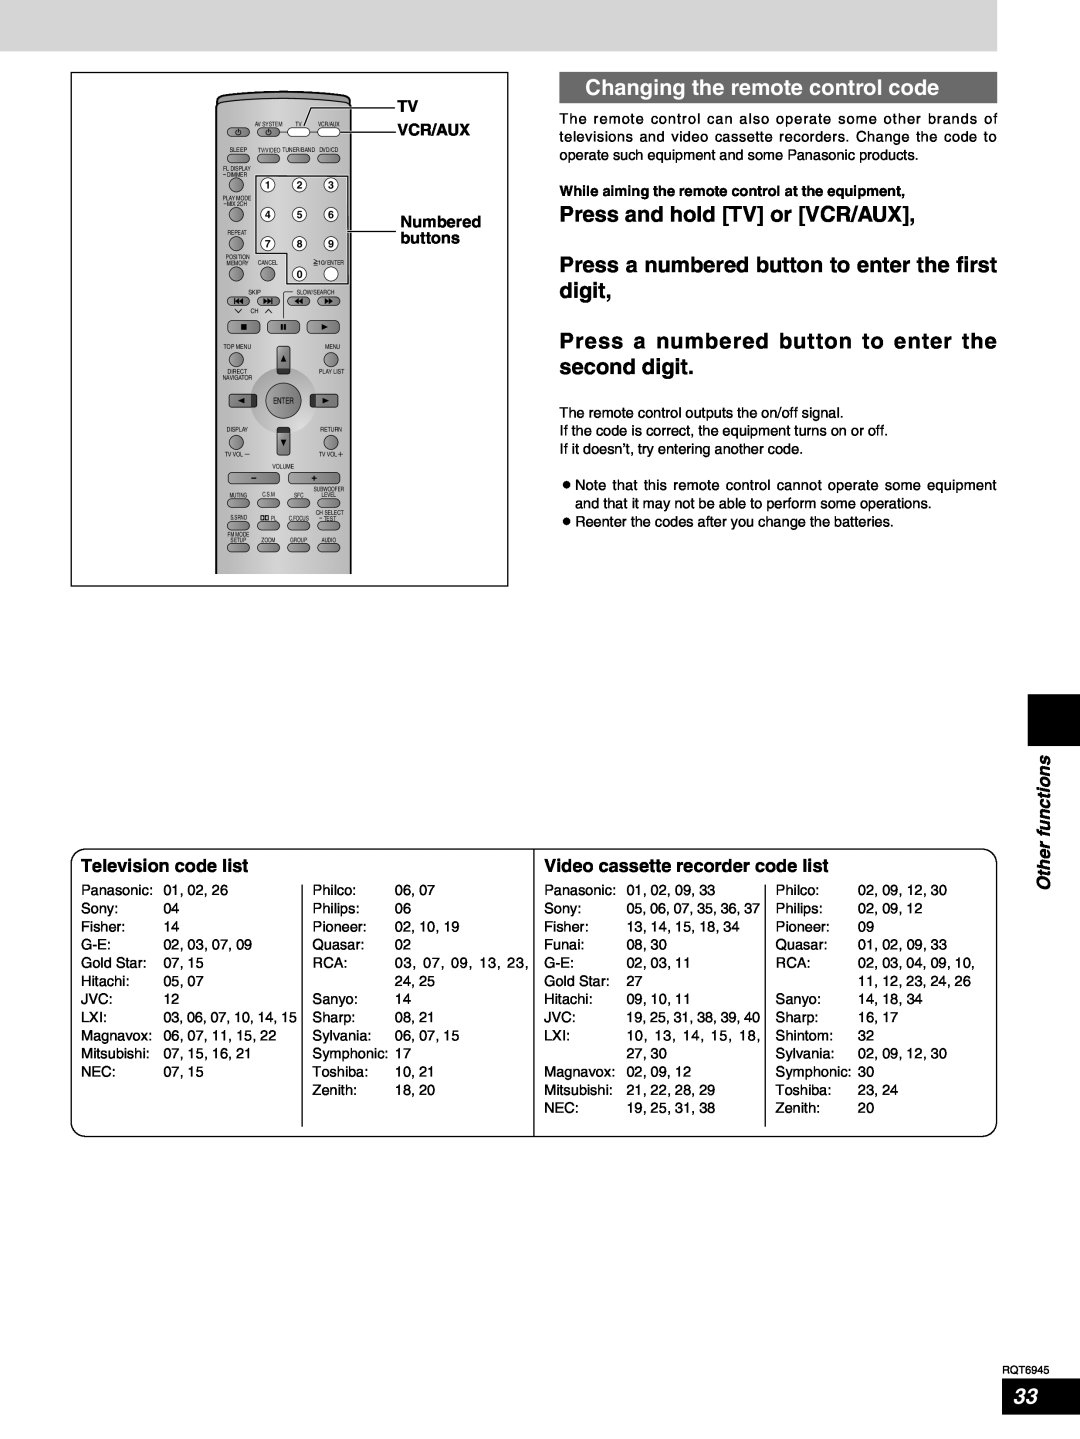 Panasonic SC-ST1 Changing the remote control code, Press and hold TV or VCR/AUX, Television code list, Other functions 